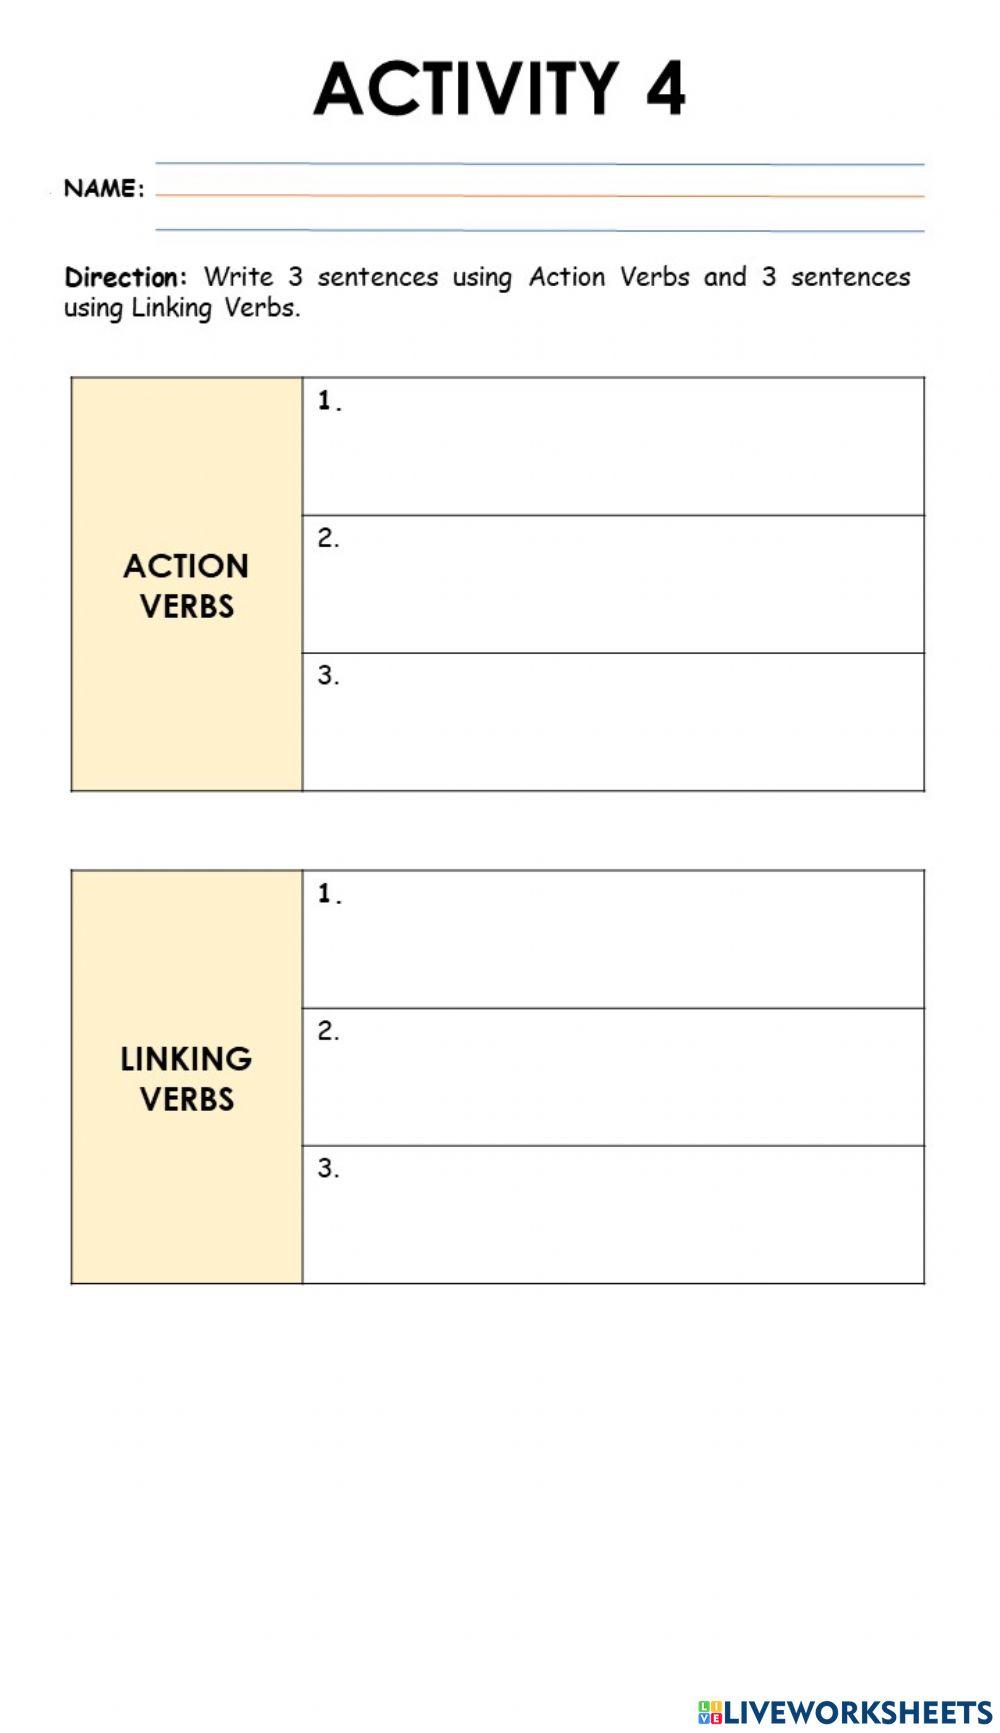 A4-Q2W8-Lesson 14 - Reviewing Action Verbs and Linking Verbs